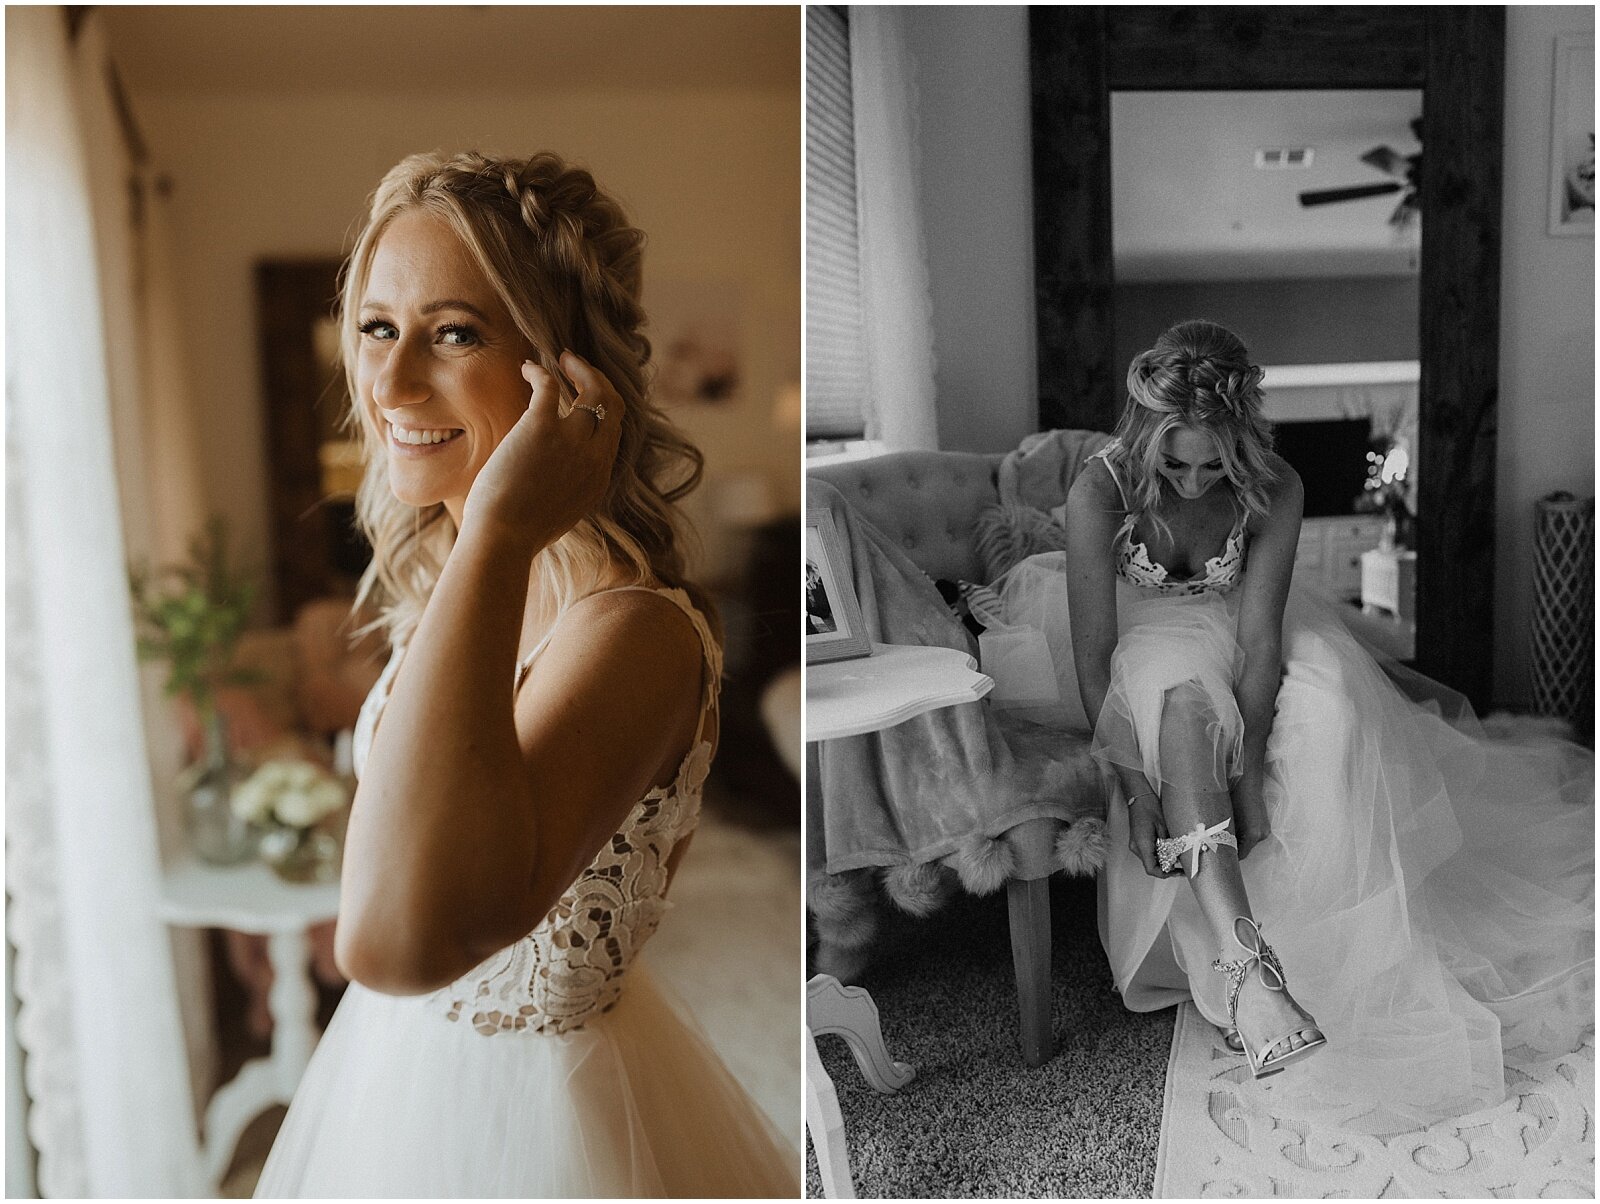 bride putting on shoes and accessories while getting ready on wedding day